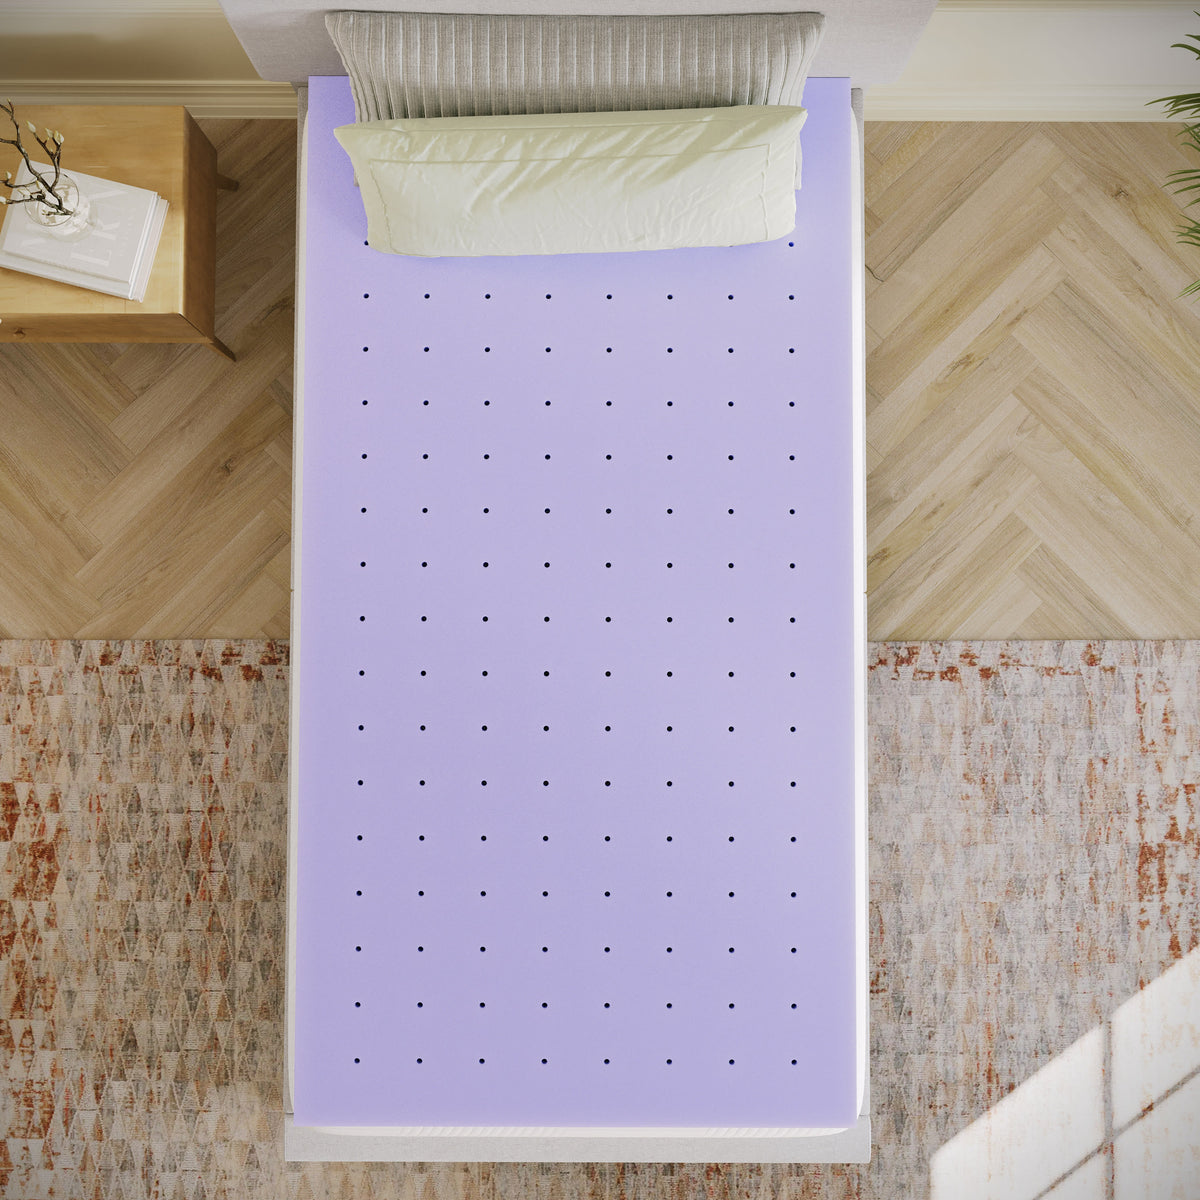 Twin |#| 3" Lavender Infused Memory Foam Mattress Topper with Ventilated Design - Twin